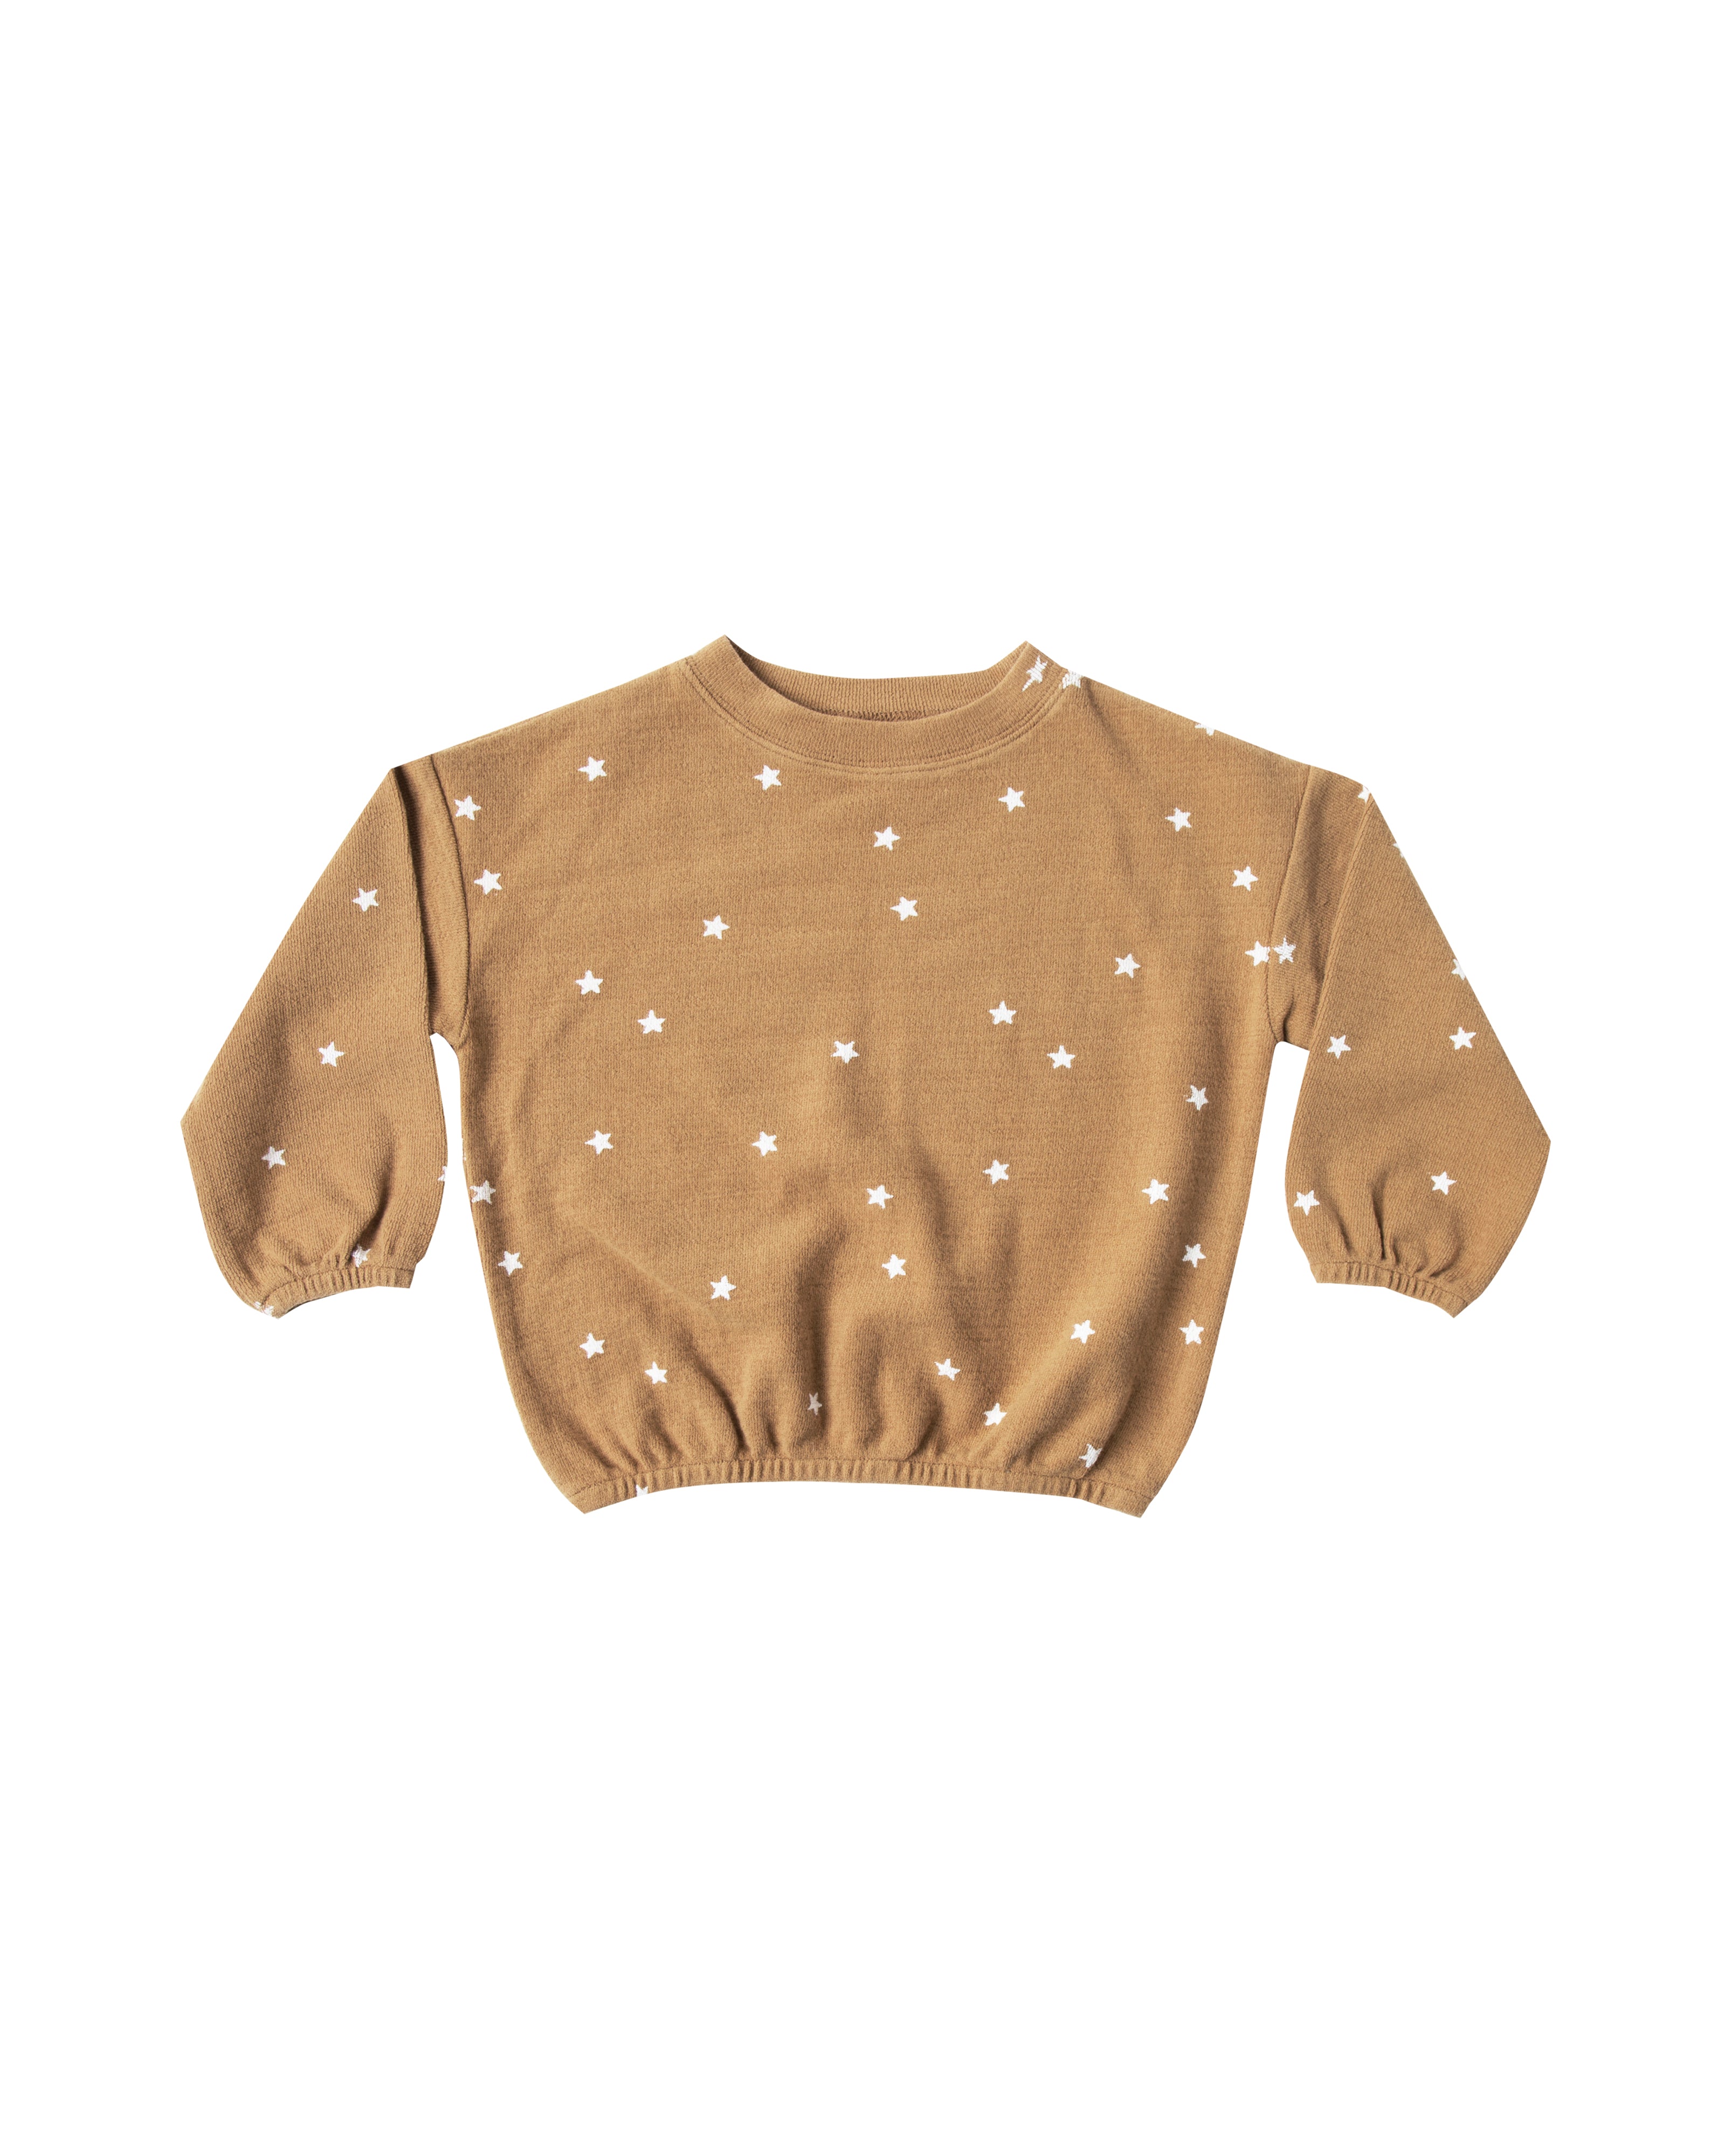 Rylee and Cru Slouchy Pullover - Stars